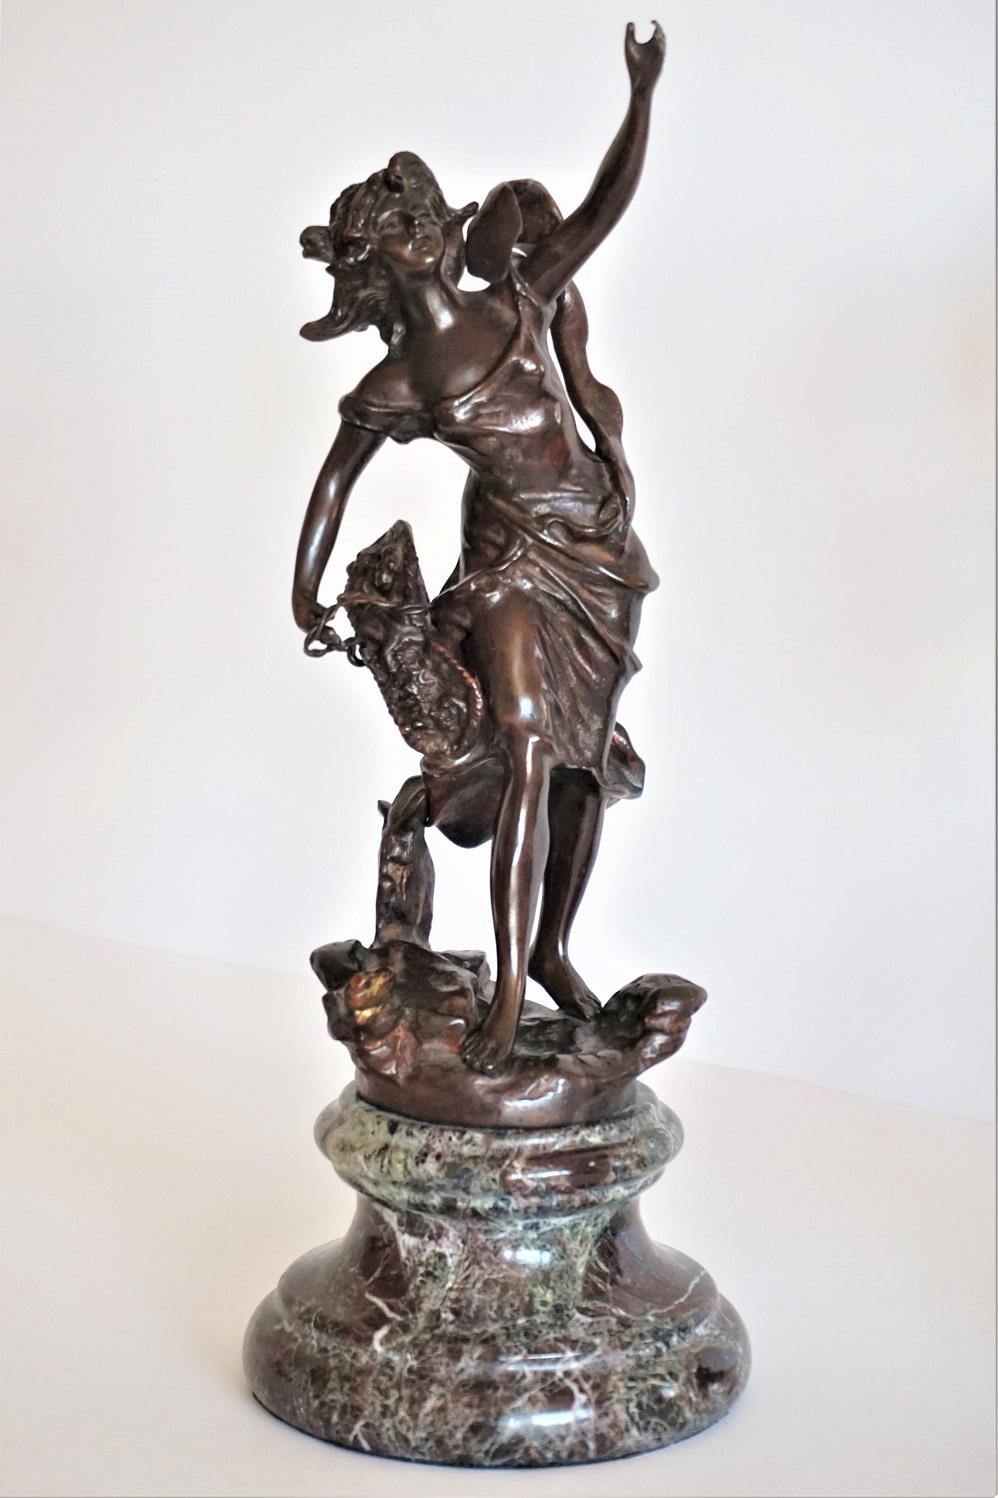 Patinated bronze sculpture on marble base, allegory of freedom, dancing young woman with a flower basket, France late 19th century.
Signed Geo Maxim.
Measures:
Height 14.25 in (36 cm)
Width/depth 5 in (12.5 cm)
Diameter of the base: 5.25 in